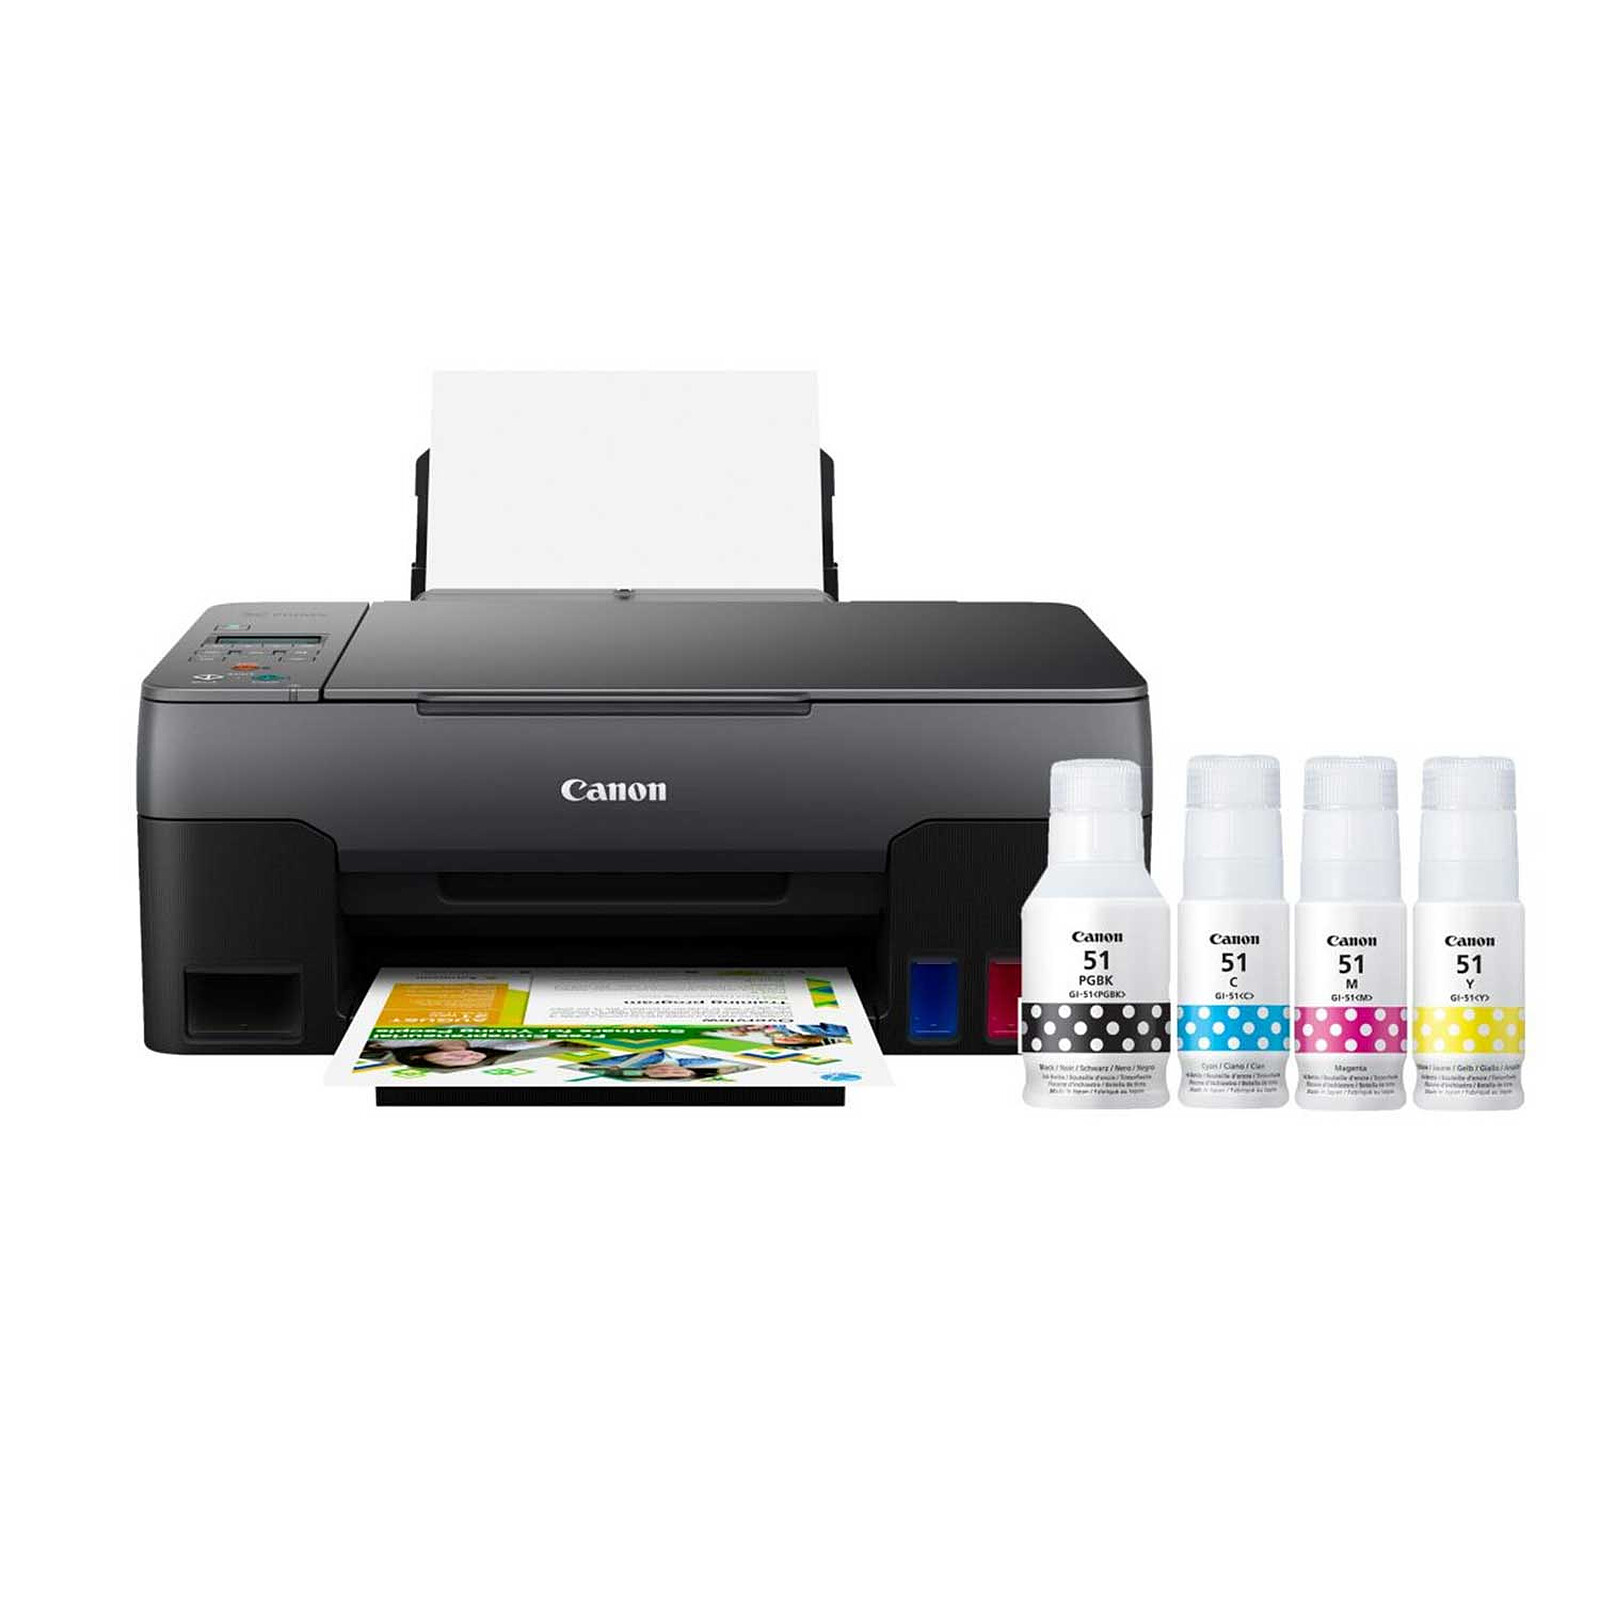 Canon PIXMA G3520 - All-in-one printer - LDLC 3-year warranty | Holy Moley